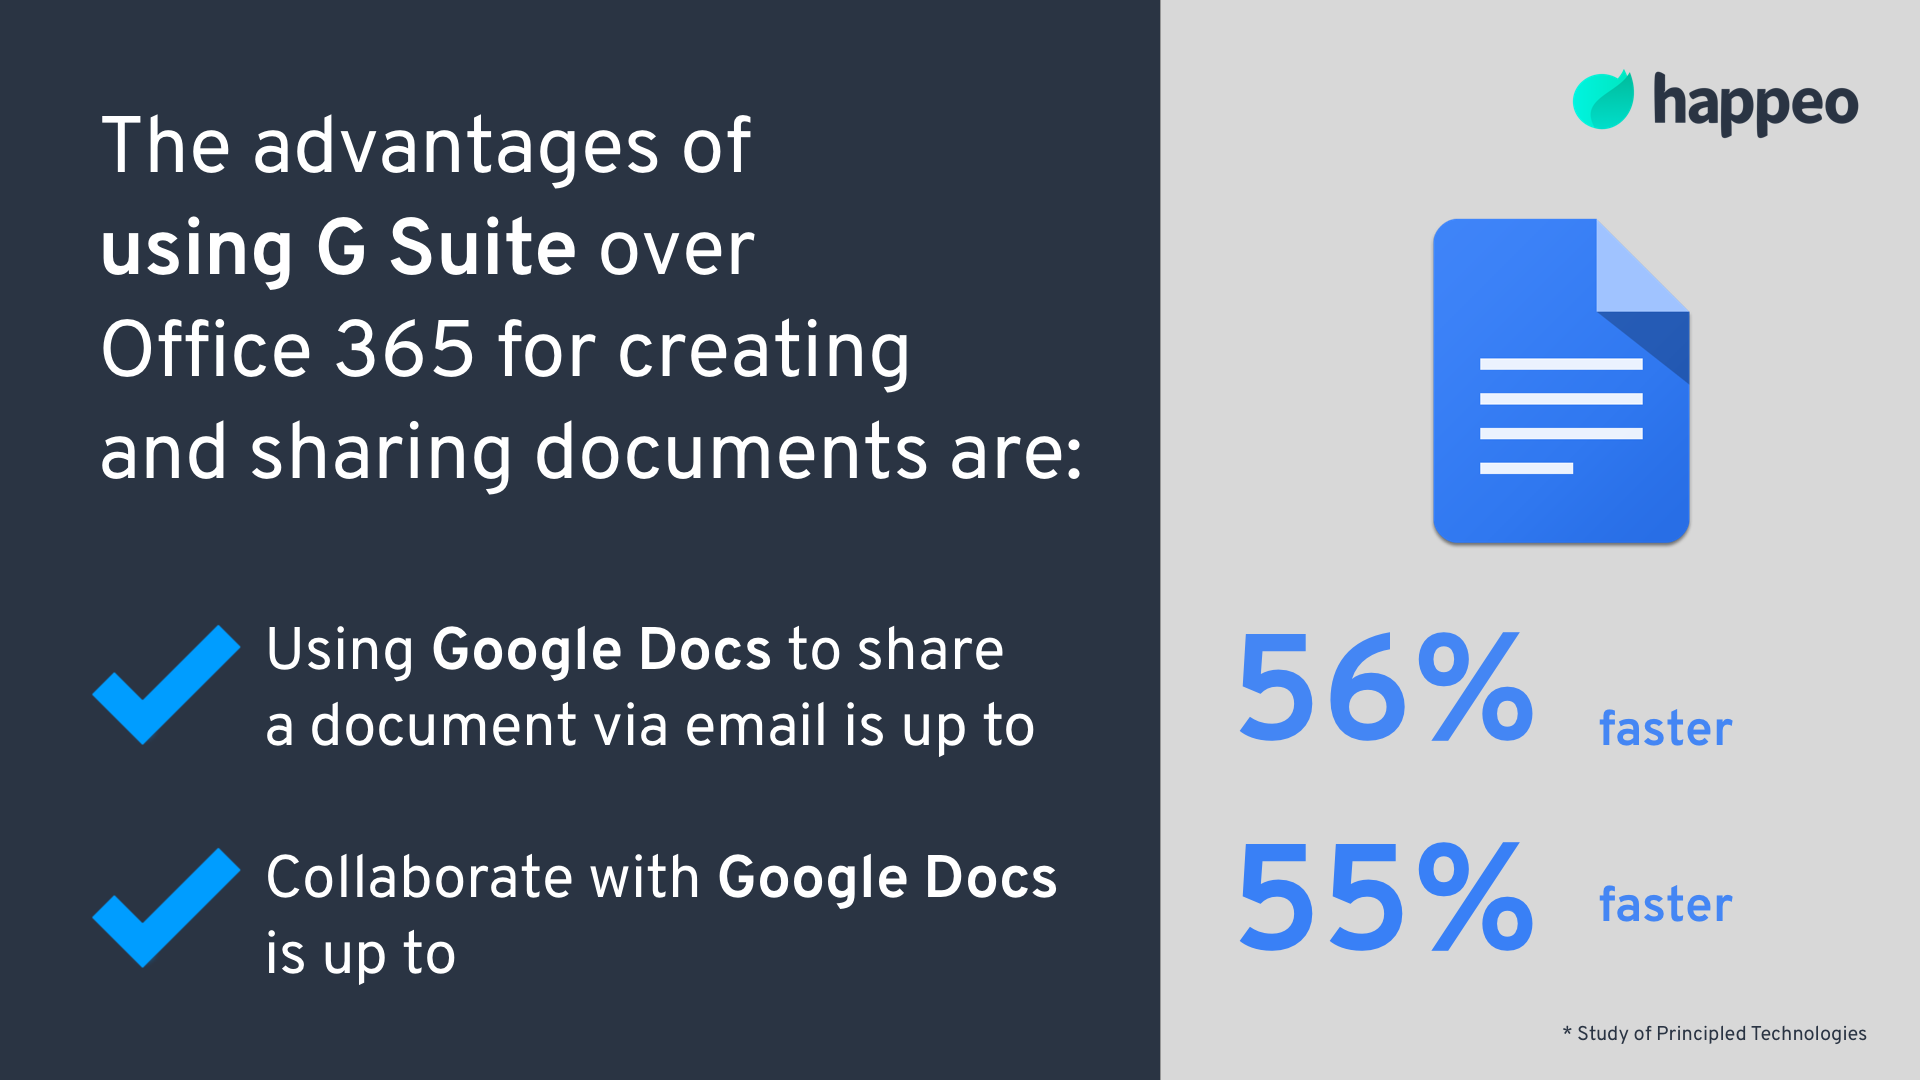 The advantages of using G Suite over Office 365 for creating and shareing documents